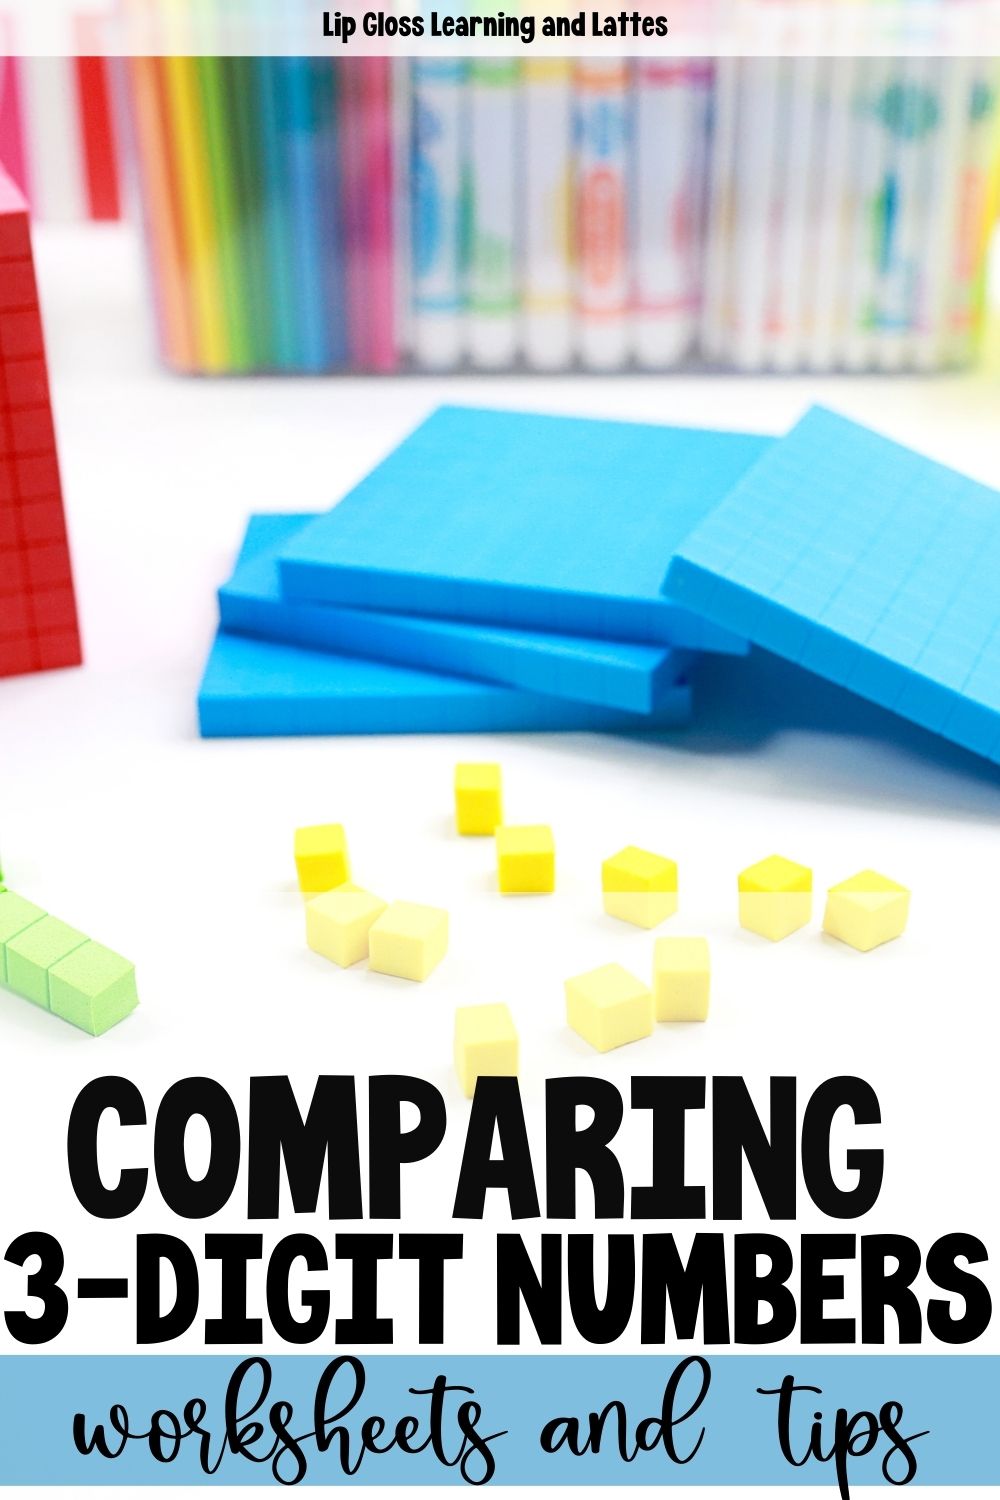 comparing-3-digit-numbers